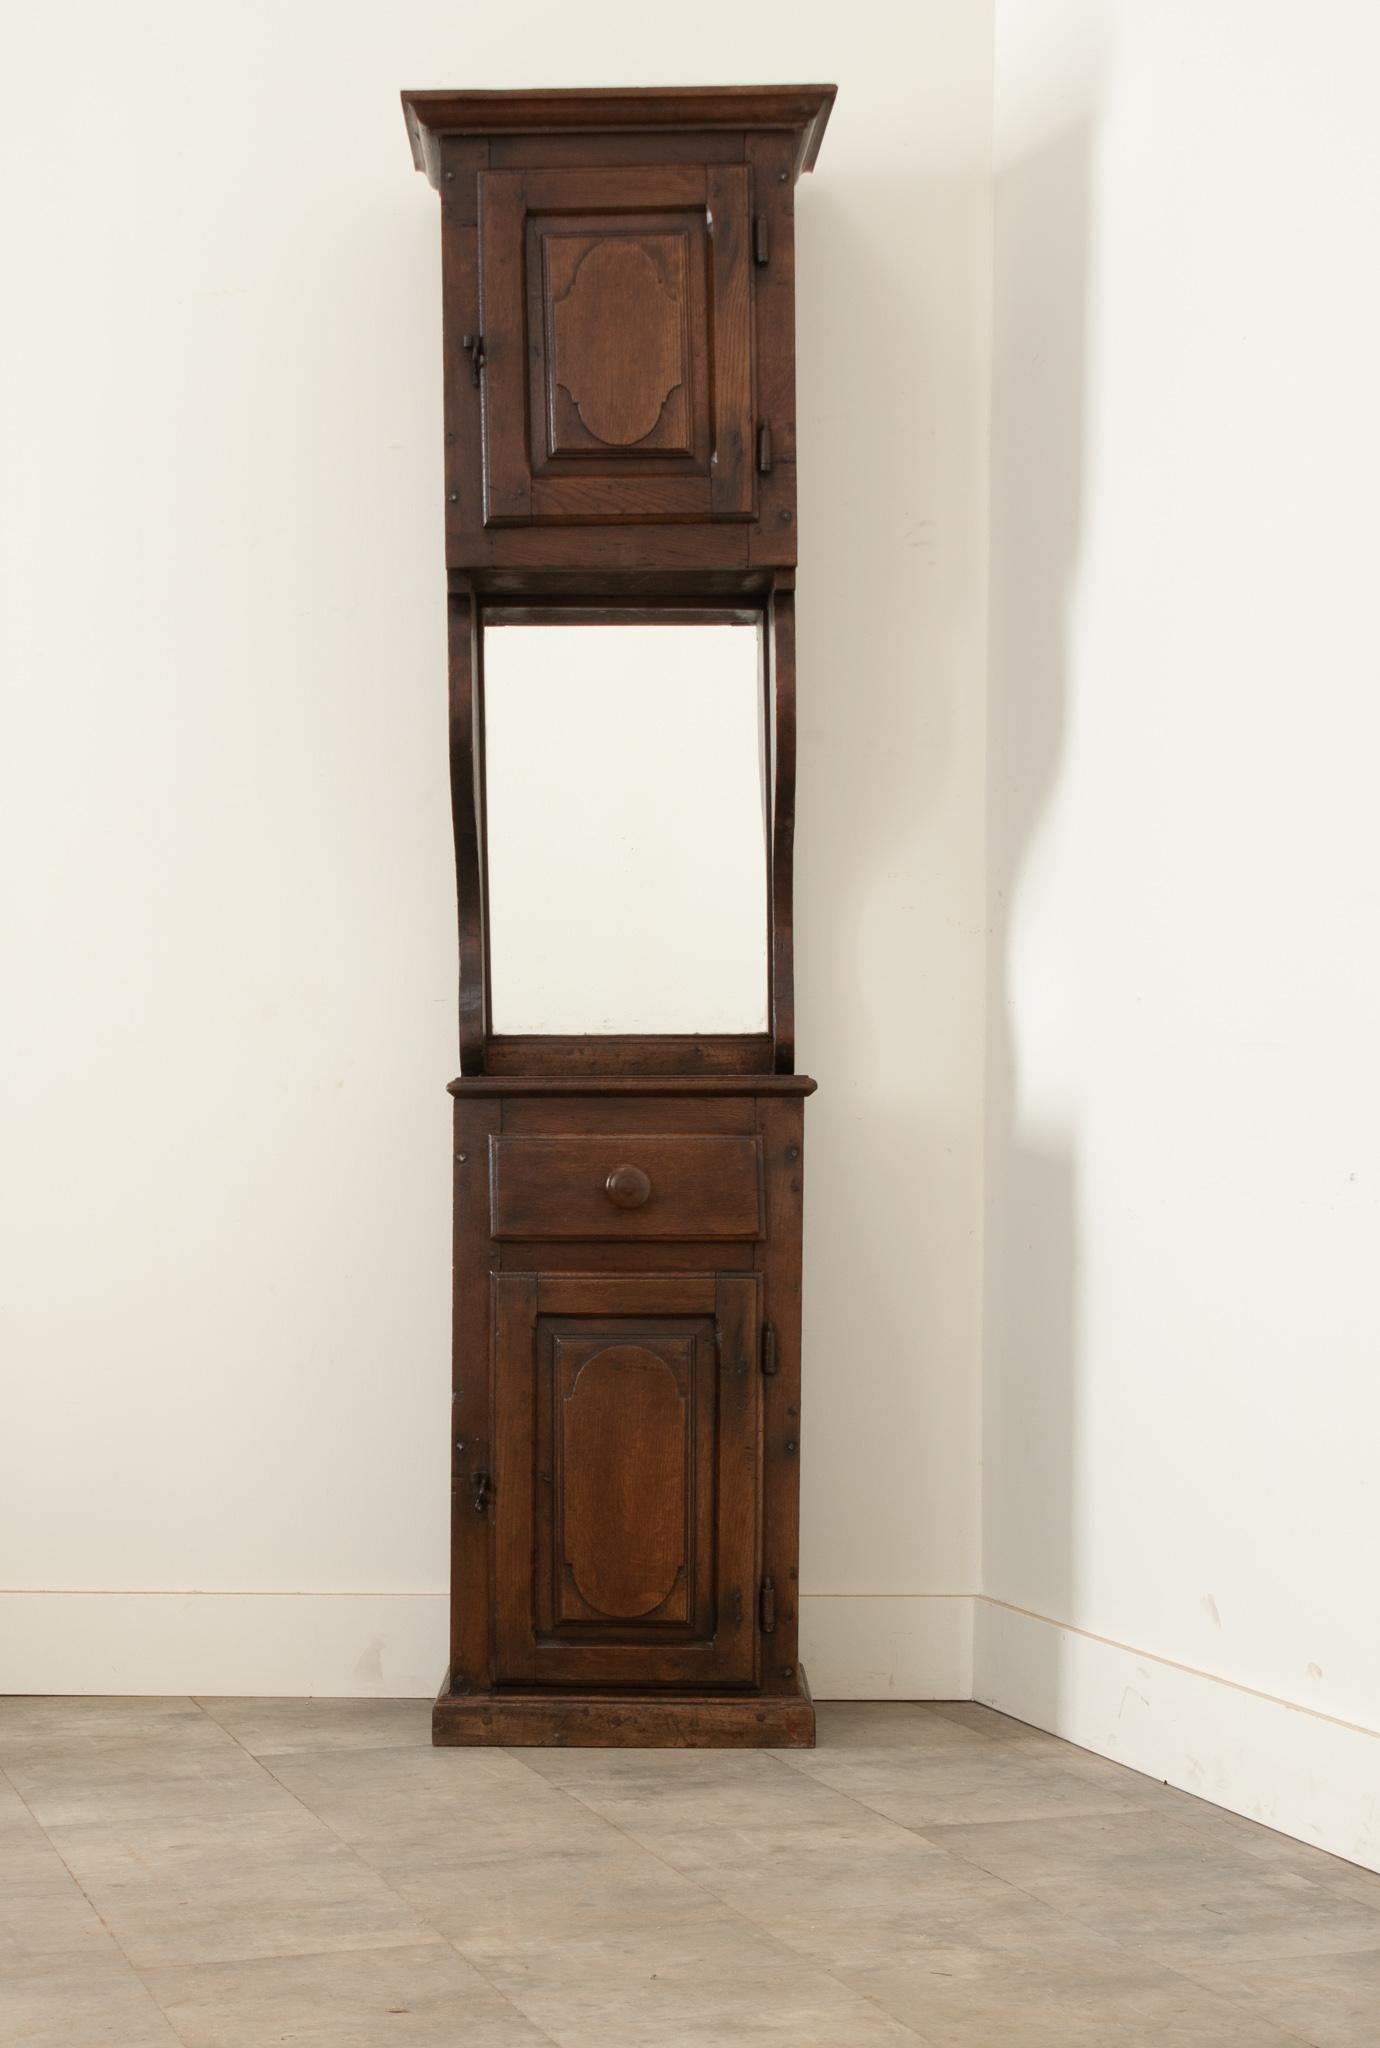 This unique storage unit was handcrafted in England during the 1780’s from solid oak. The upper cabinet door has provincial carvings and conceals a space with a single shelf. A newly installed rectangular mirror is flanked by curved forms,